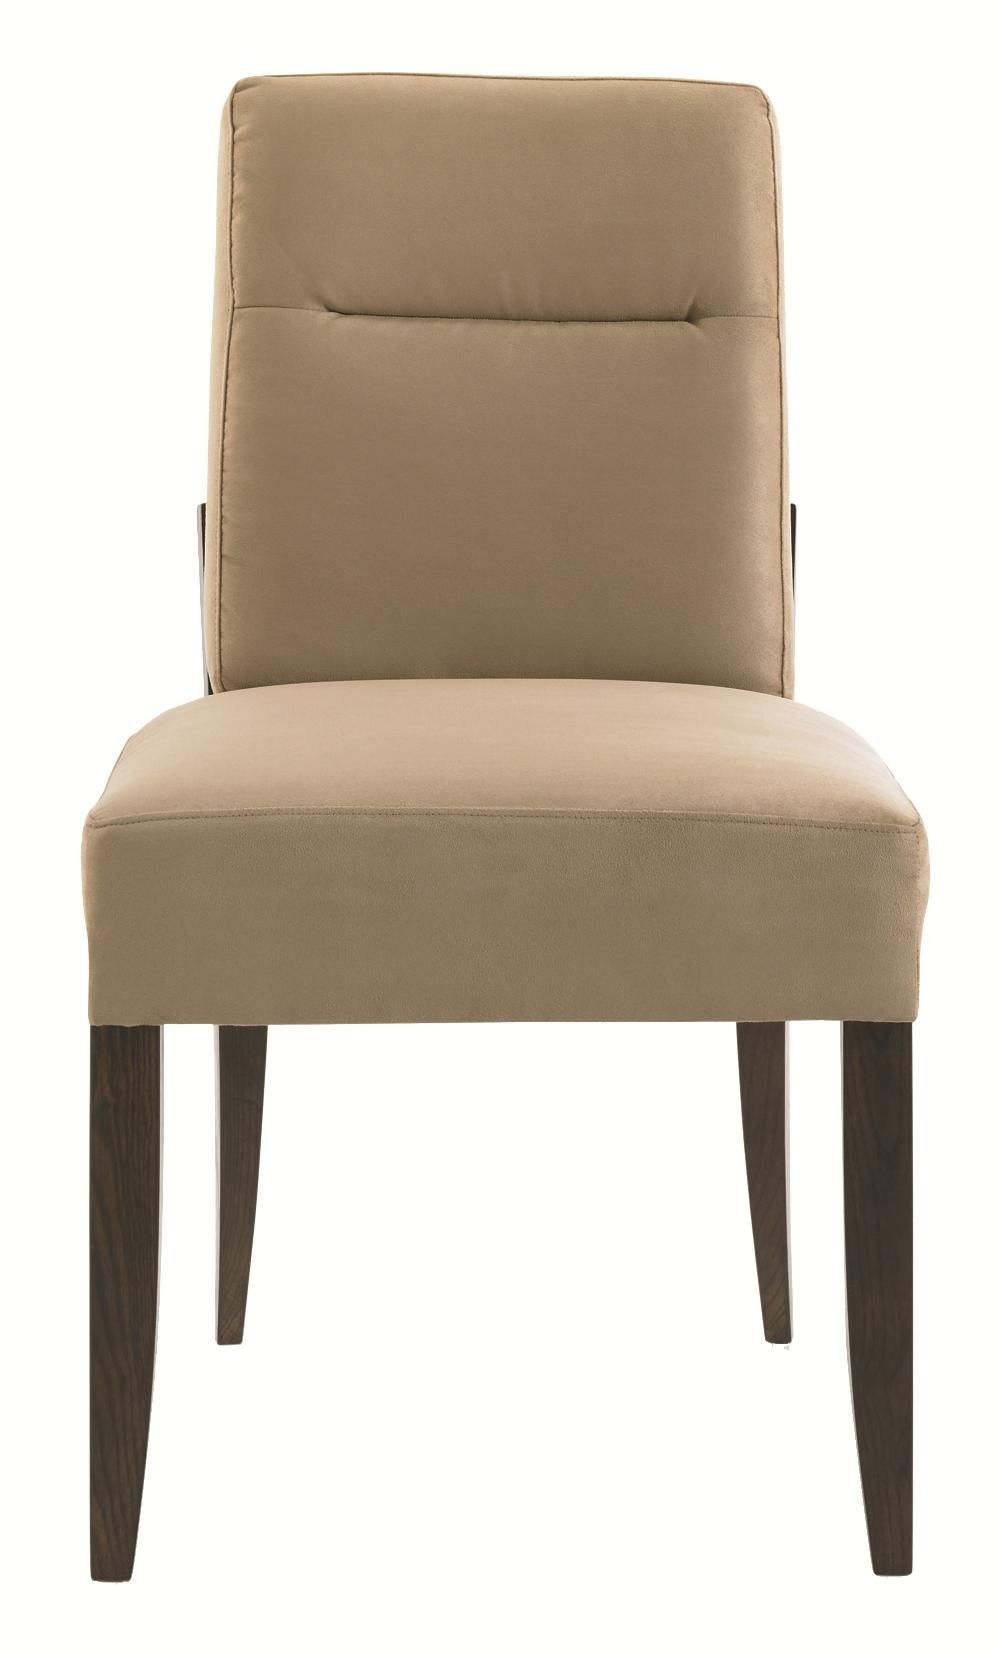 Trendy Craftsman Upholstered Side Chairs Within Schnadig Modern Artisan Craftsmen Side Chair With Upholstered Seat (Photo 8 of 20)